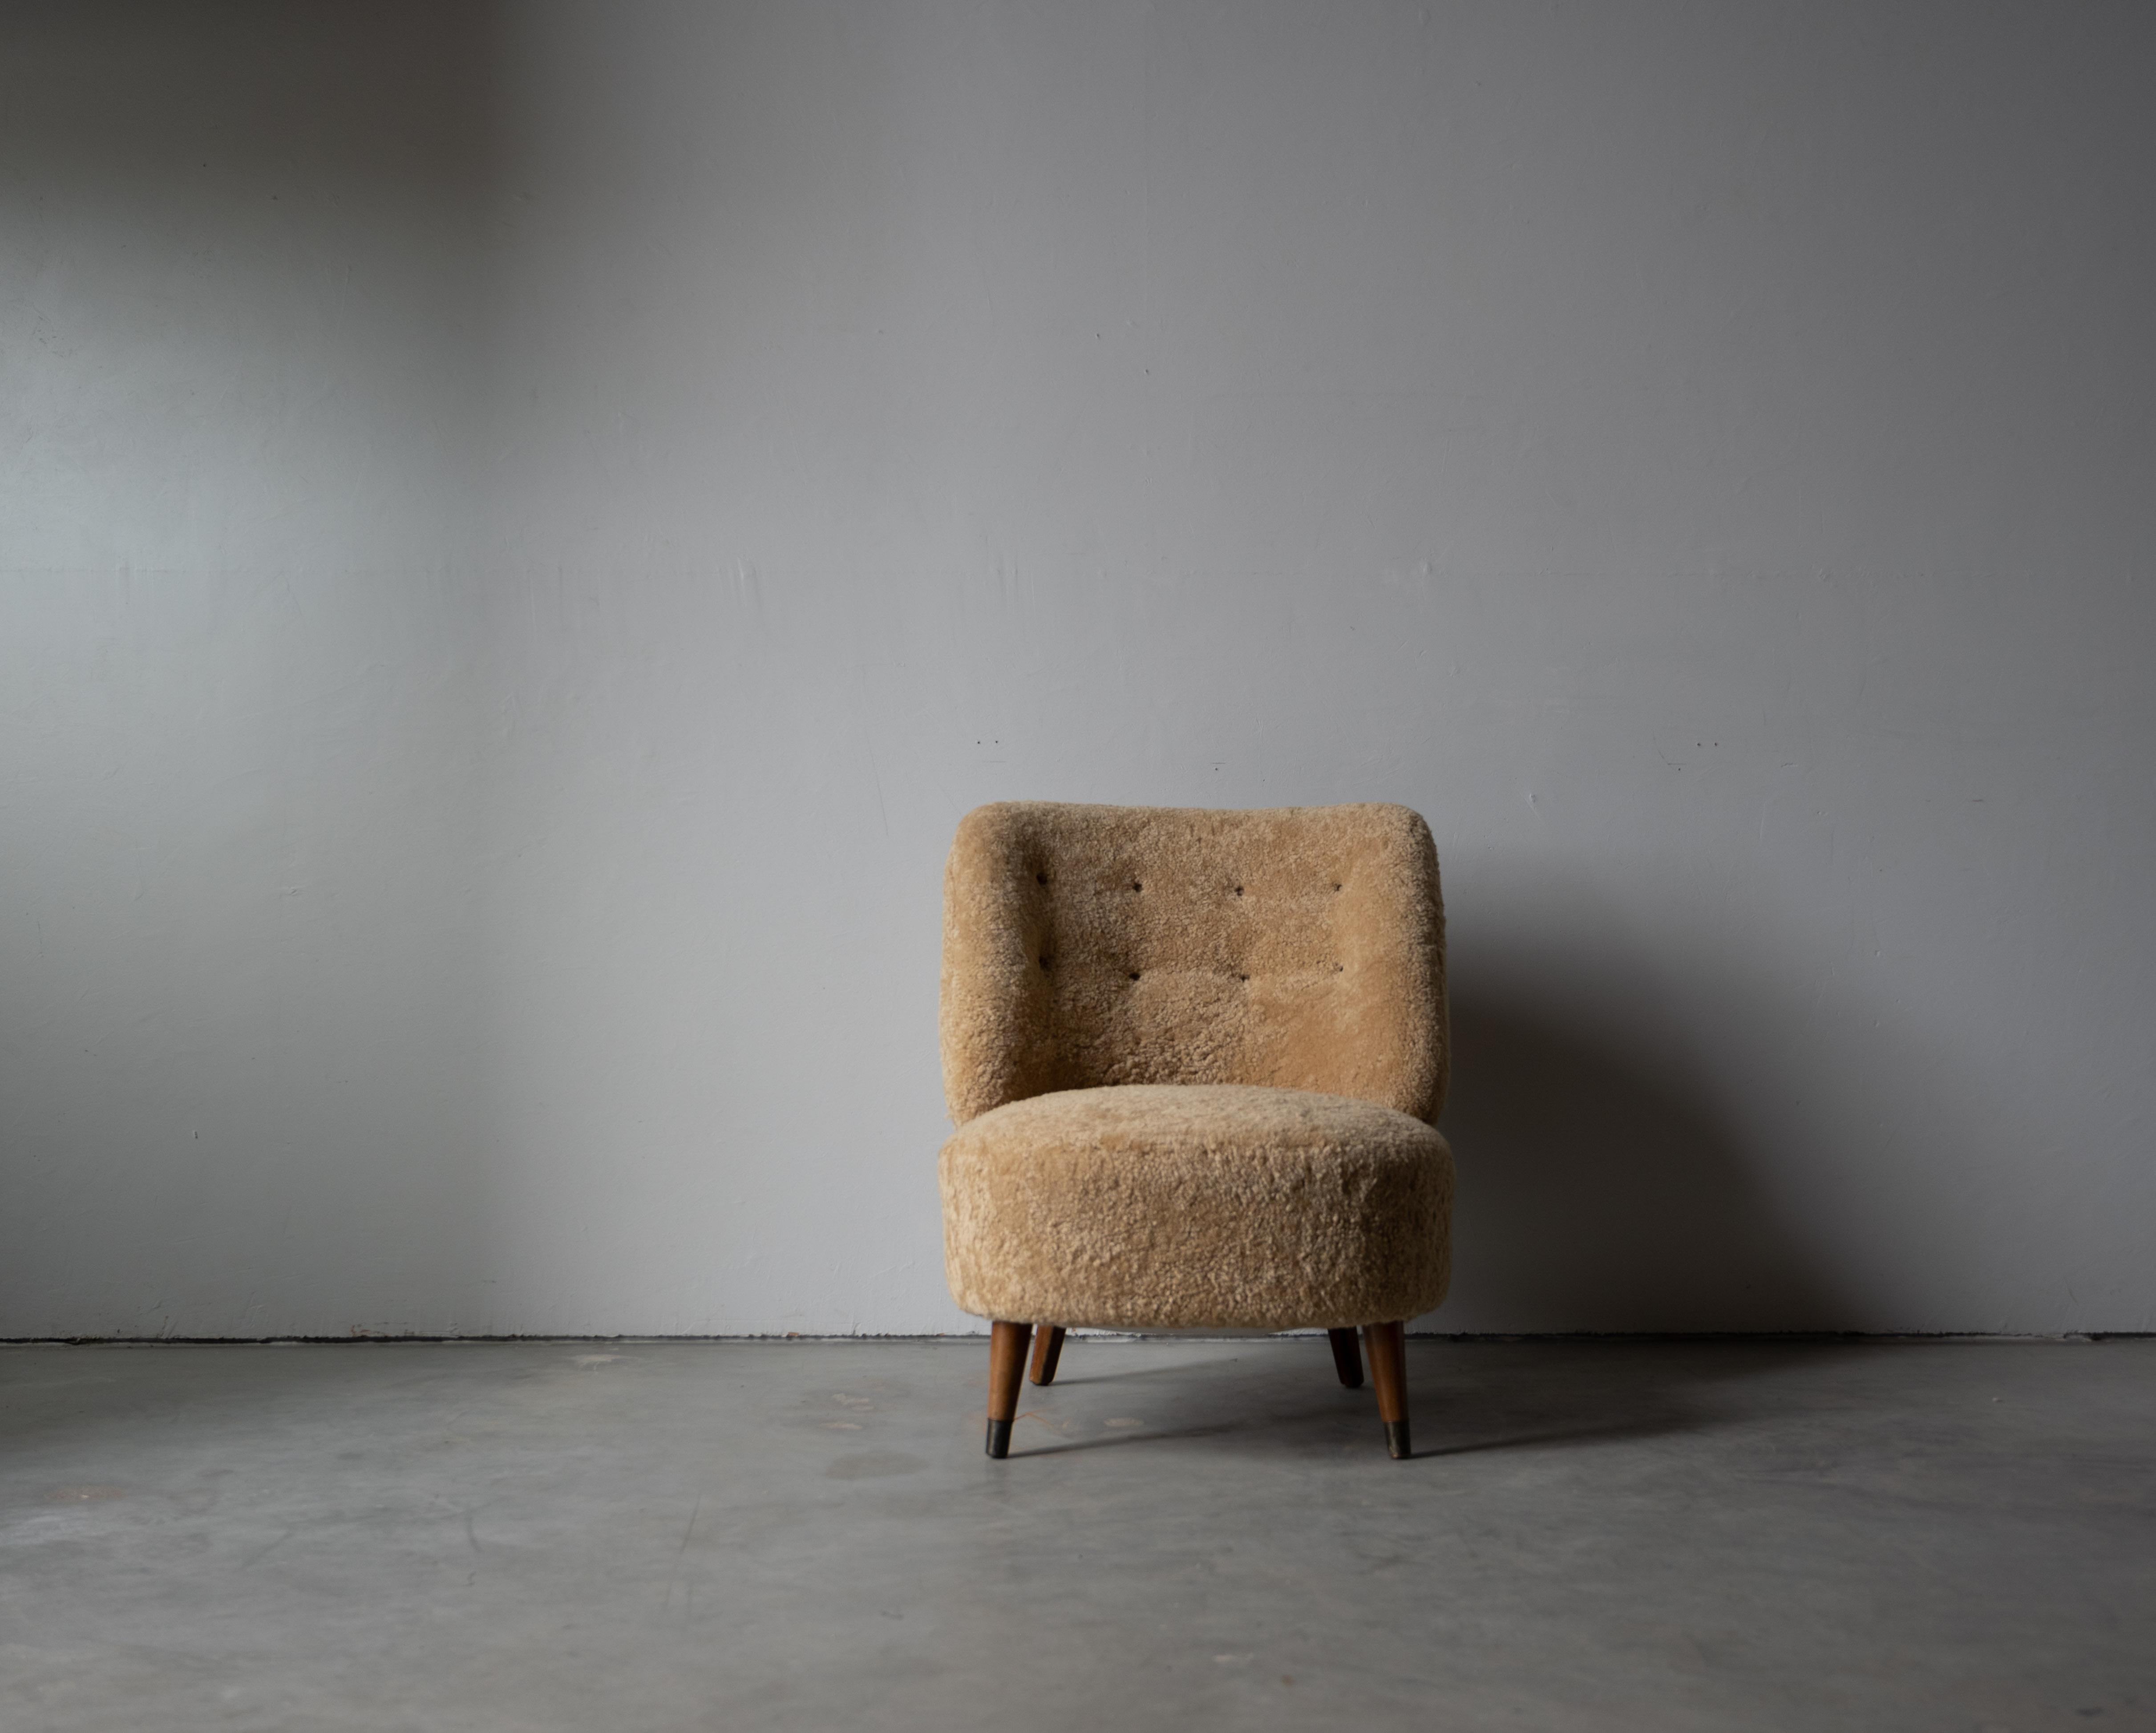 Sheepskin Sven Staaf, Lounge Chair, Beige Shearling, Wood, Sweden, 1940s For Sale